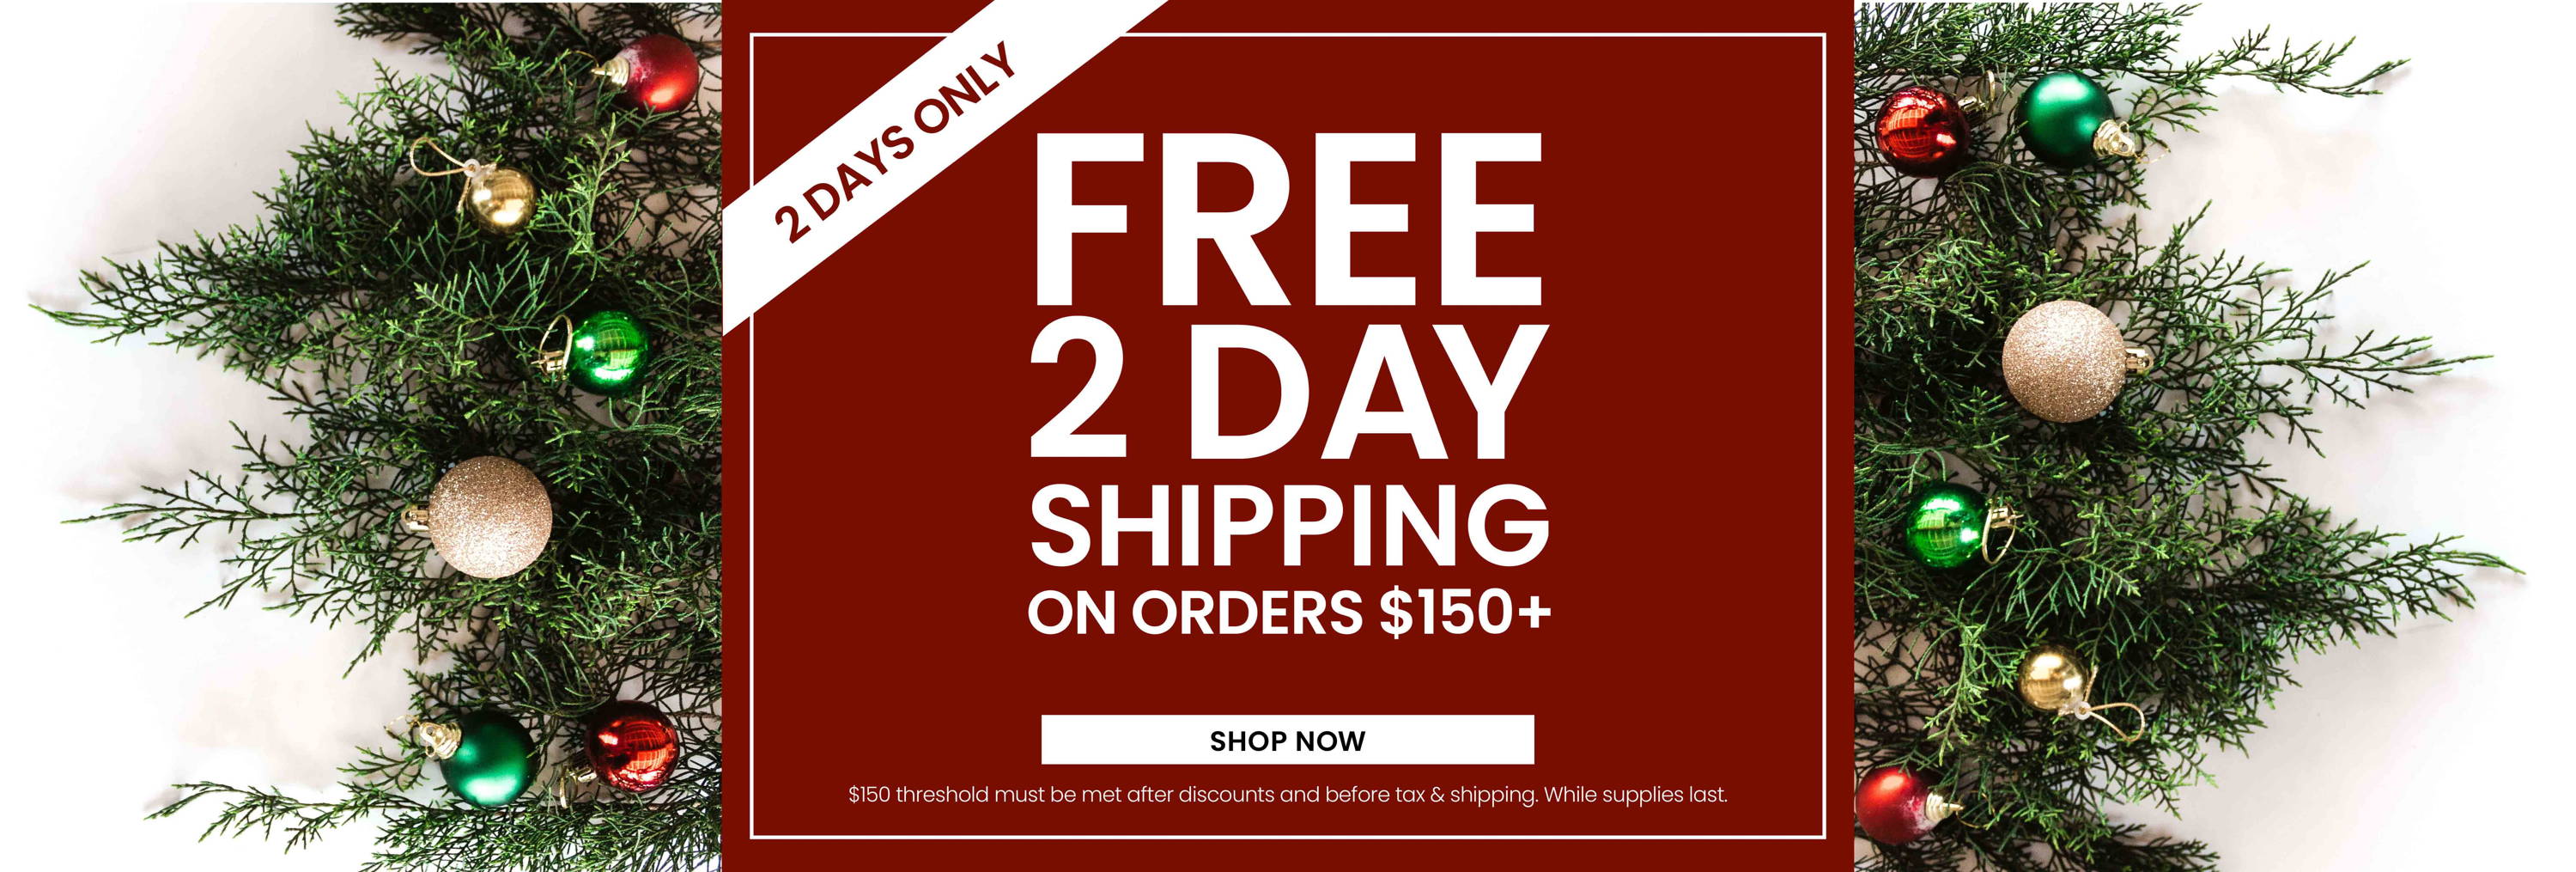 Free 2 Day Shipping on Orders $150+.